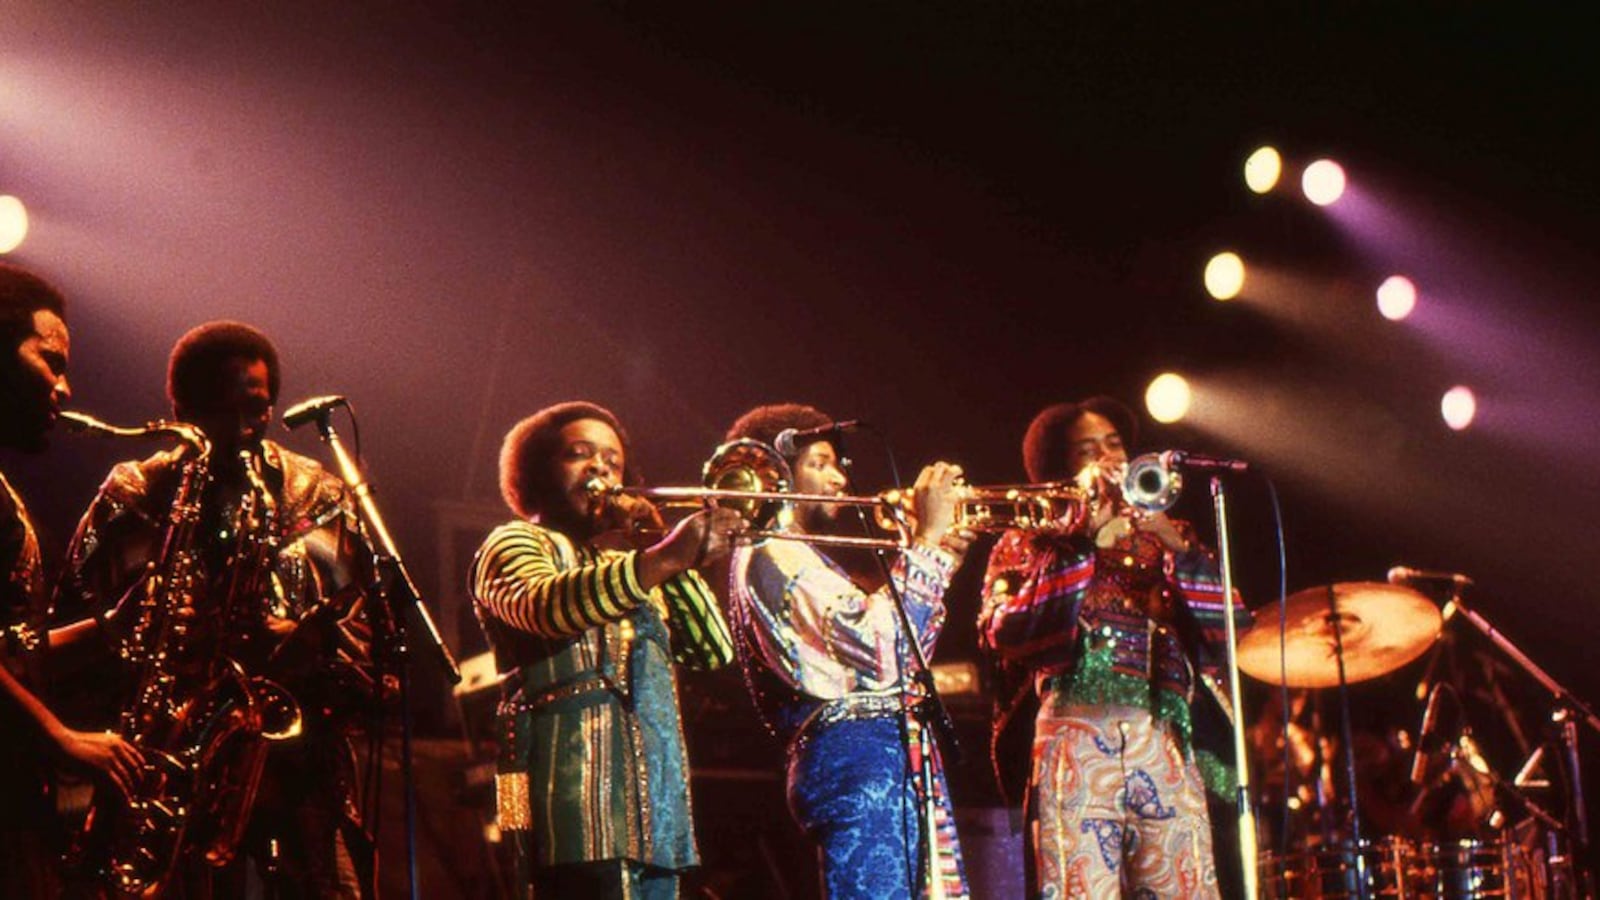 Earth, Wind and Fire in 1982